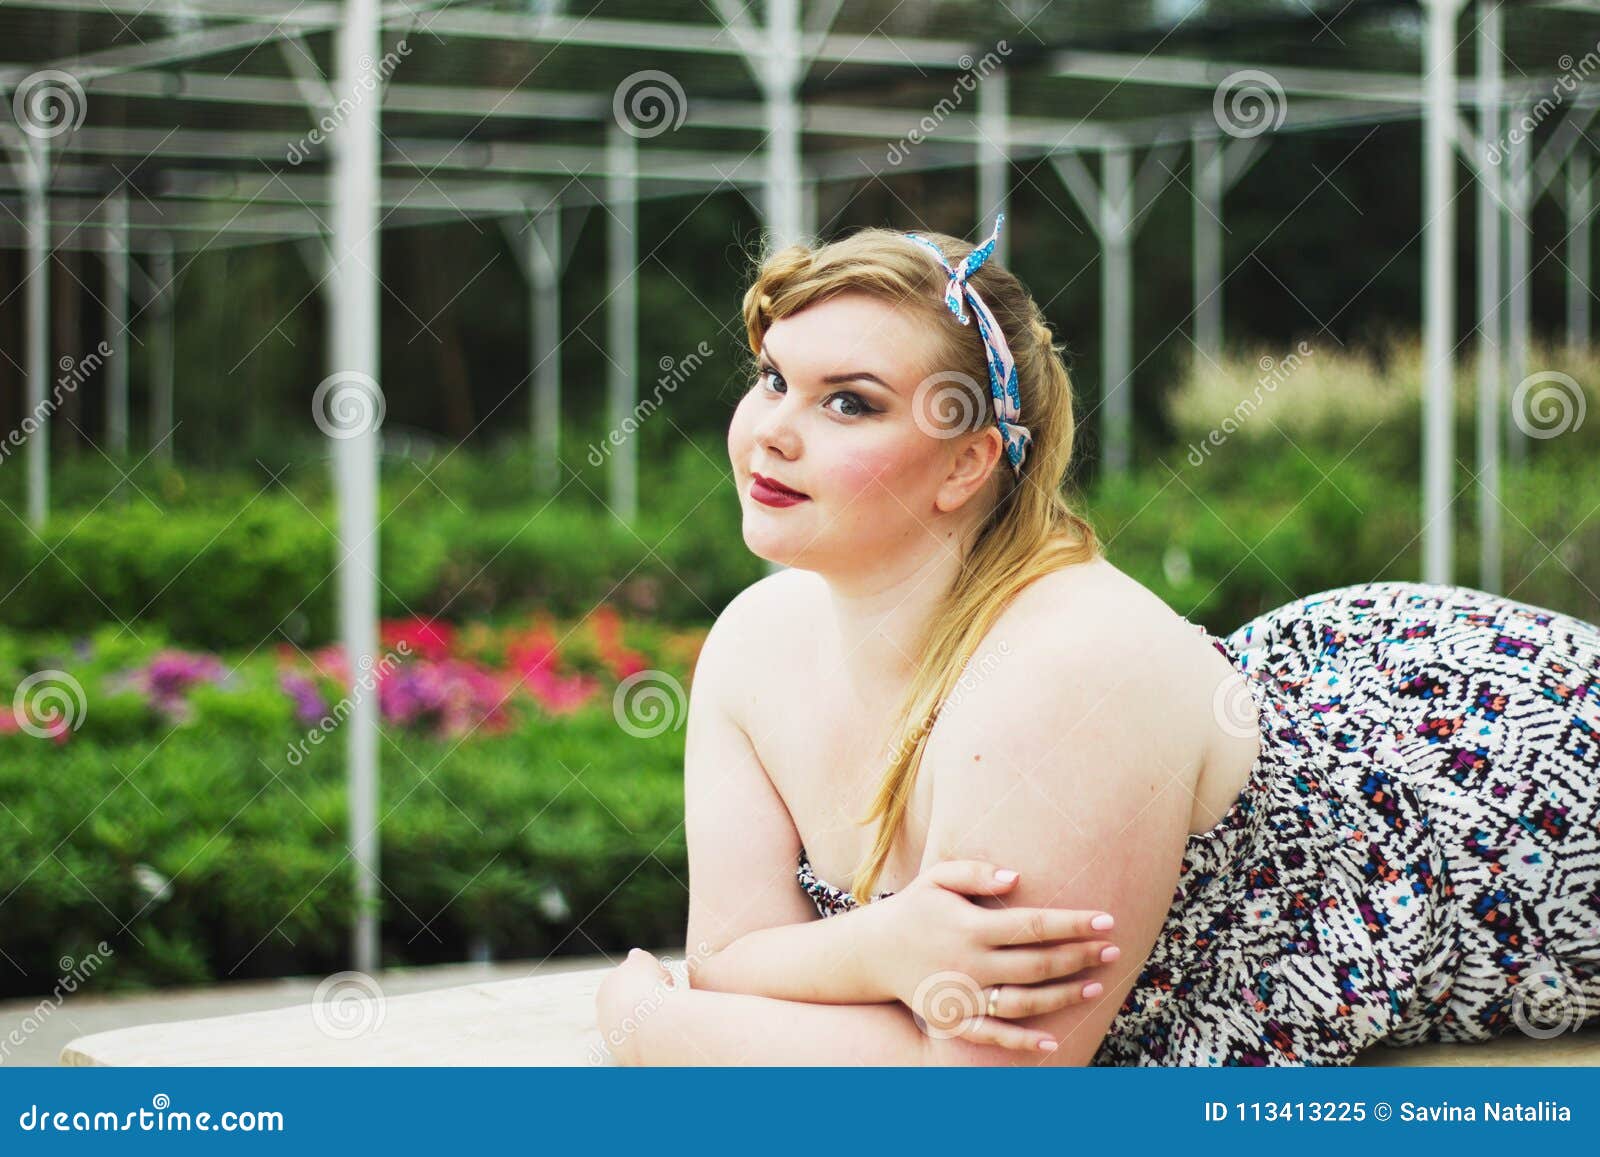 Young Beautiful Plus Size Modelt in Black Bra Holding Mannequin